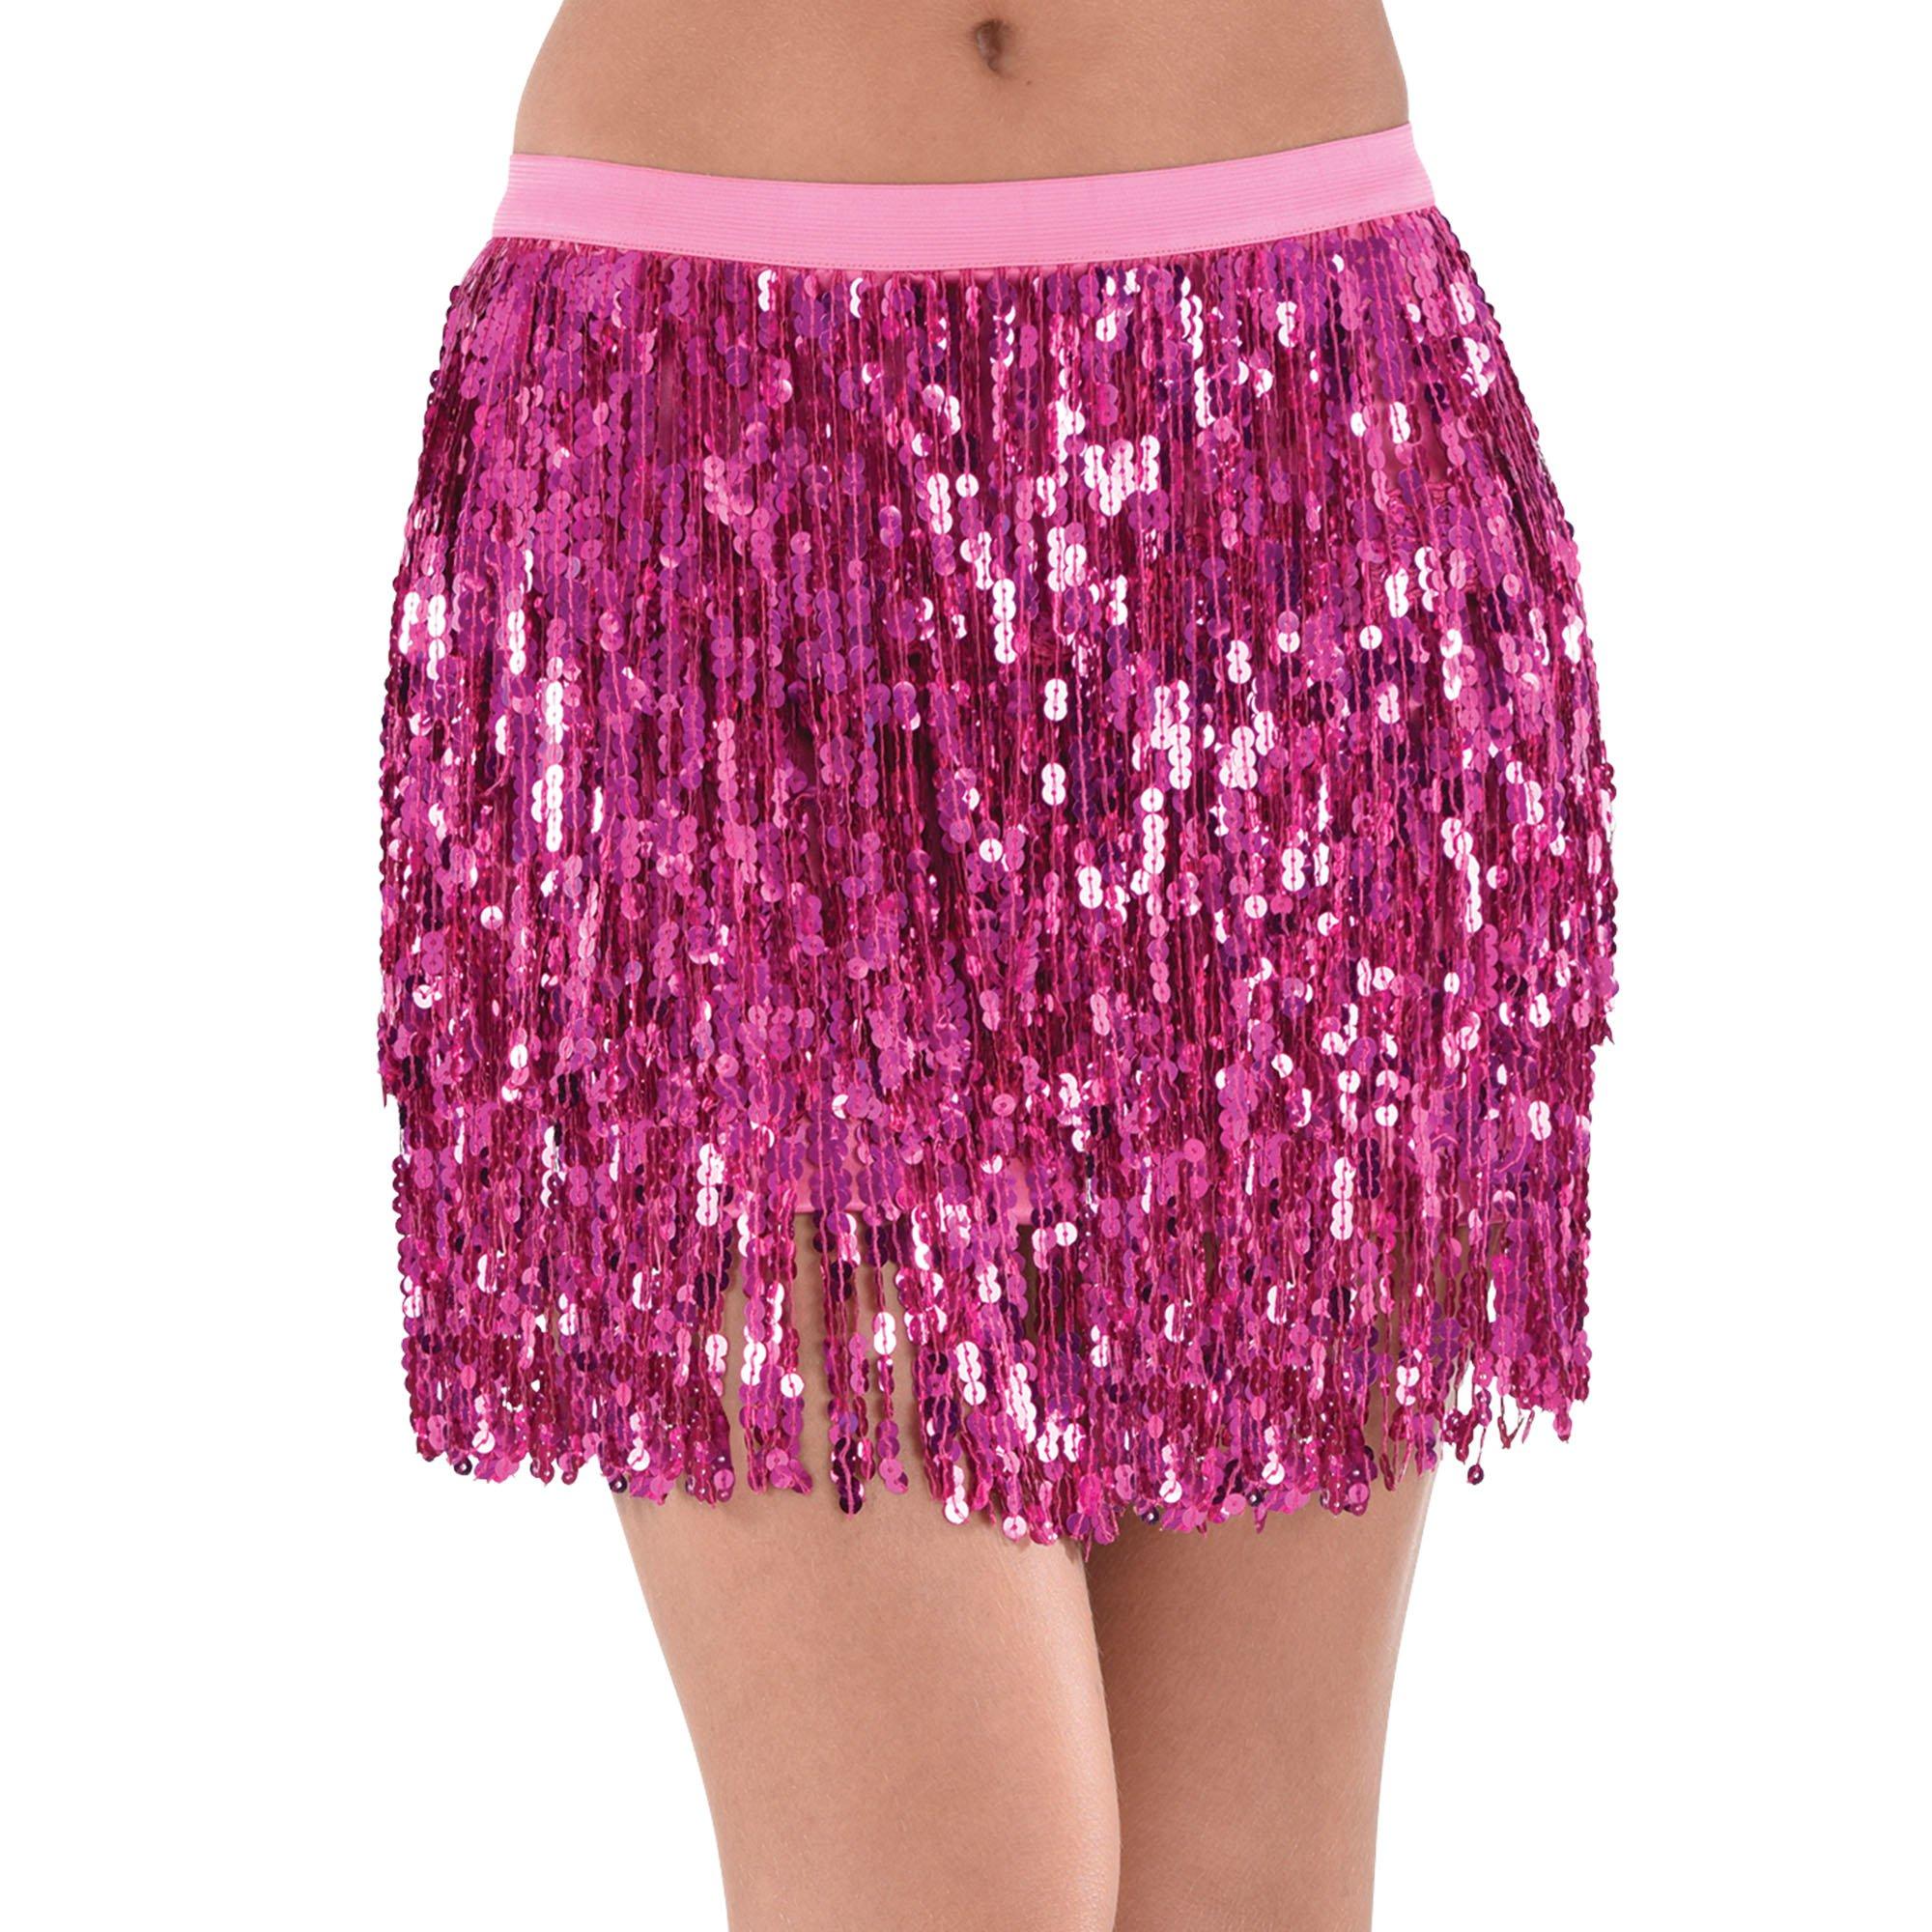 Adult Bright Pink Sequin Skirt